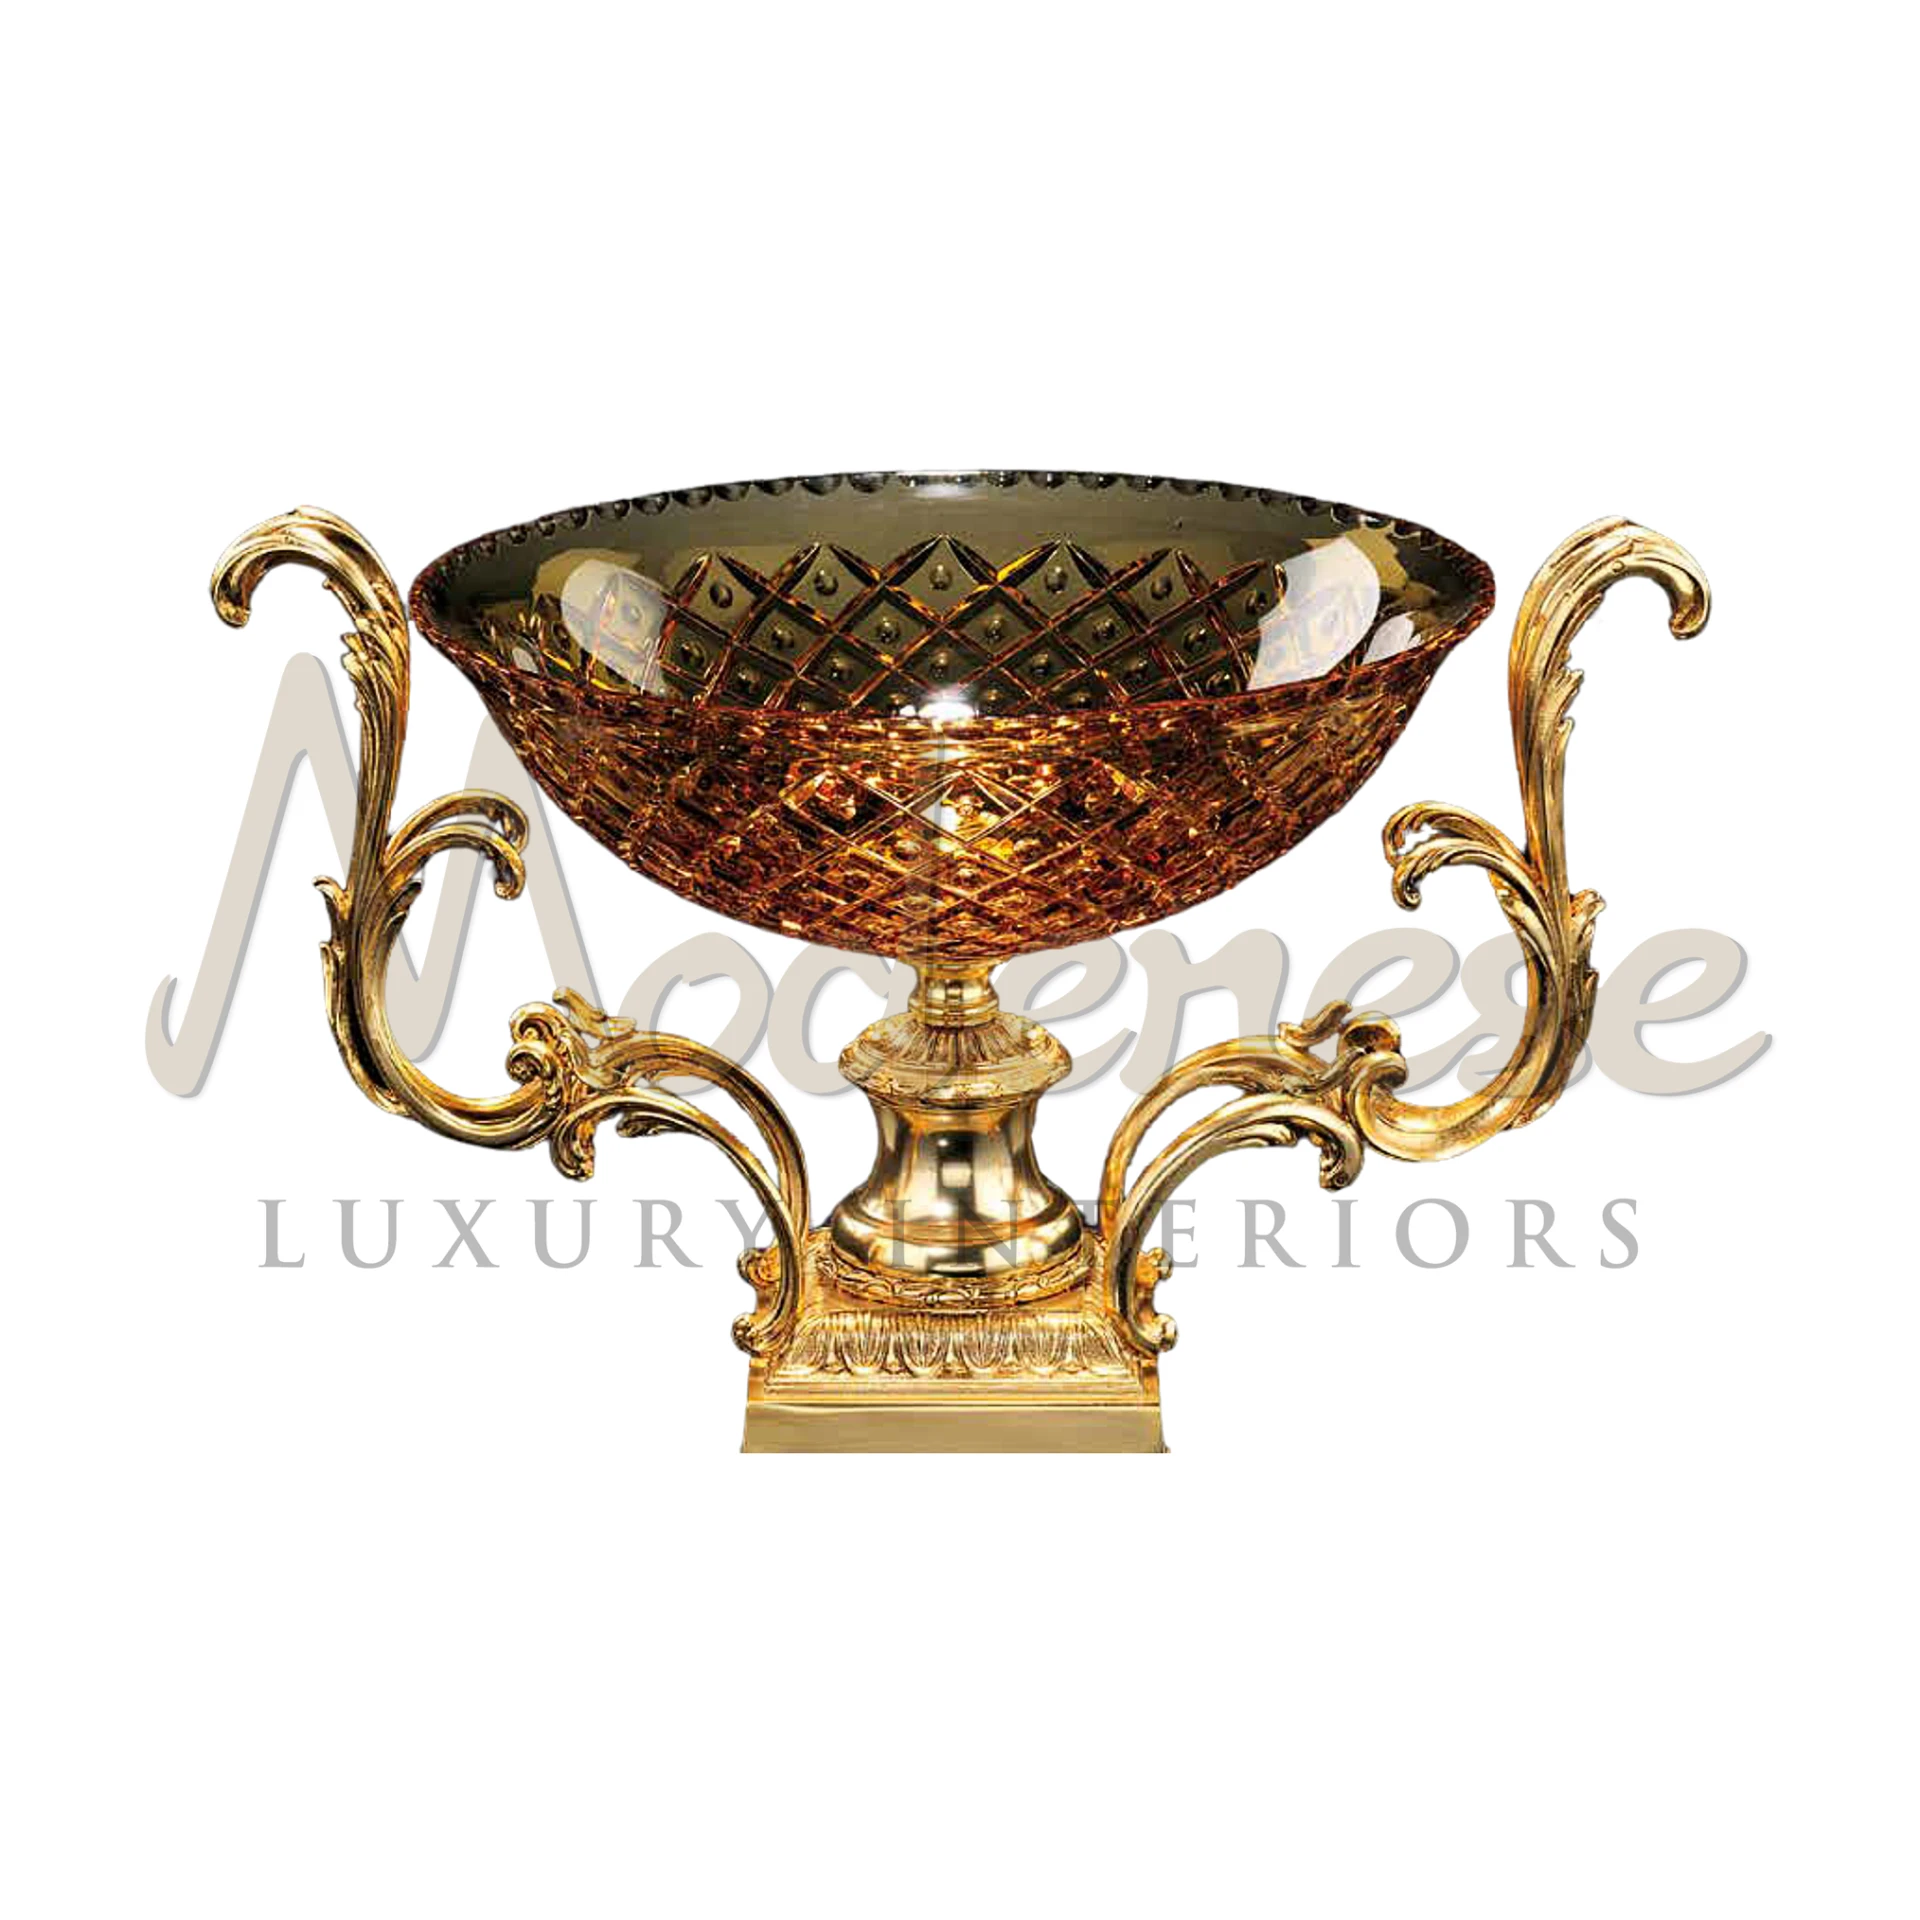 Handmade Gold Vase from Modenese, a luxurious art piece that adds elegance to interiors, ideal for flowers or as decor.